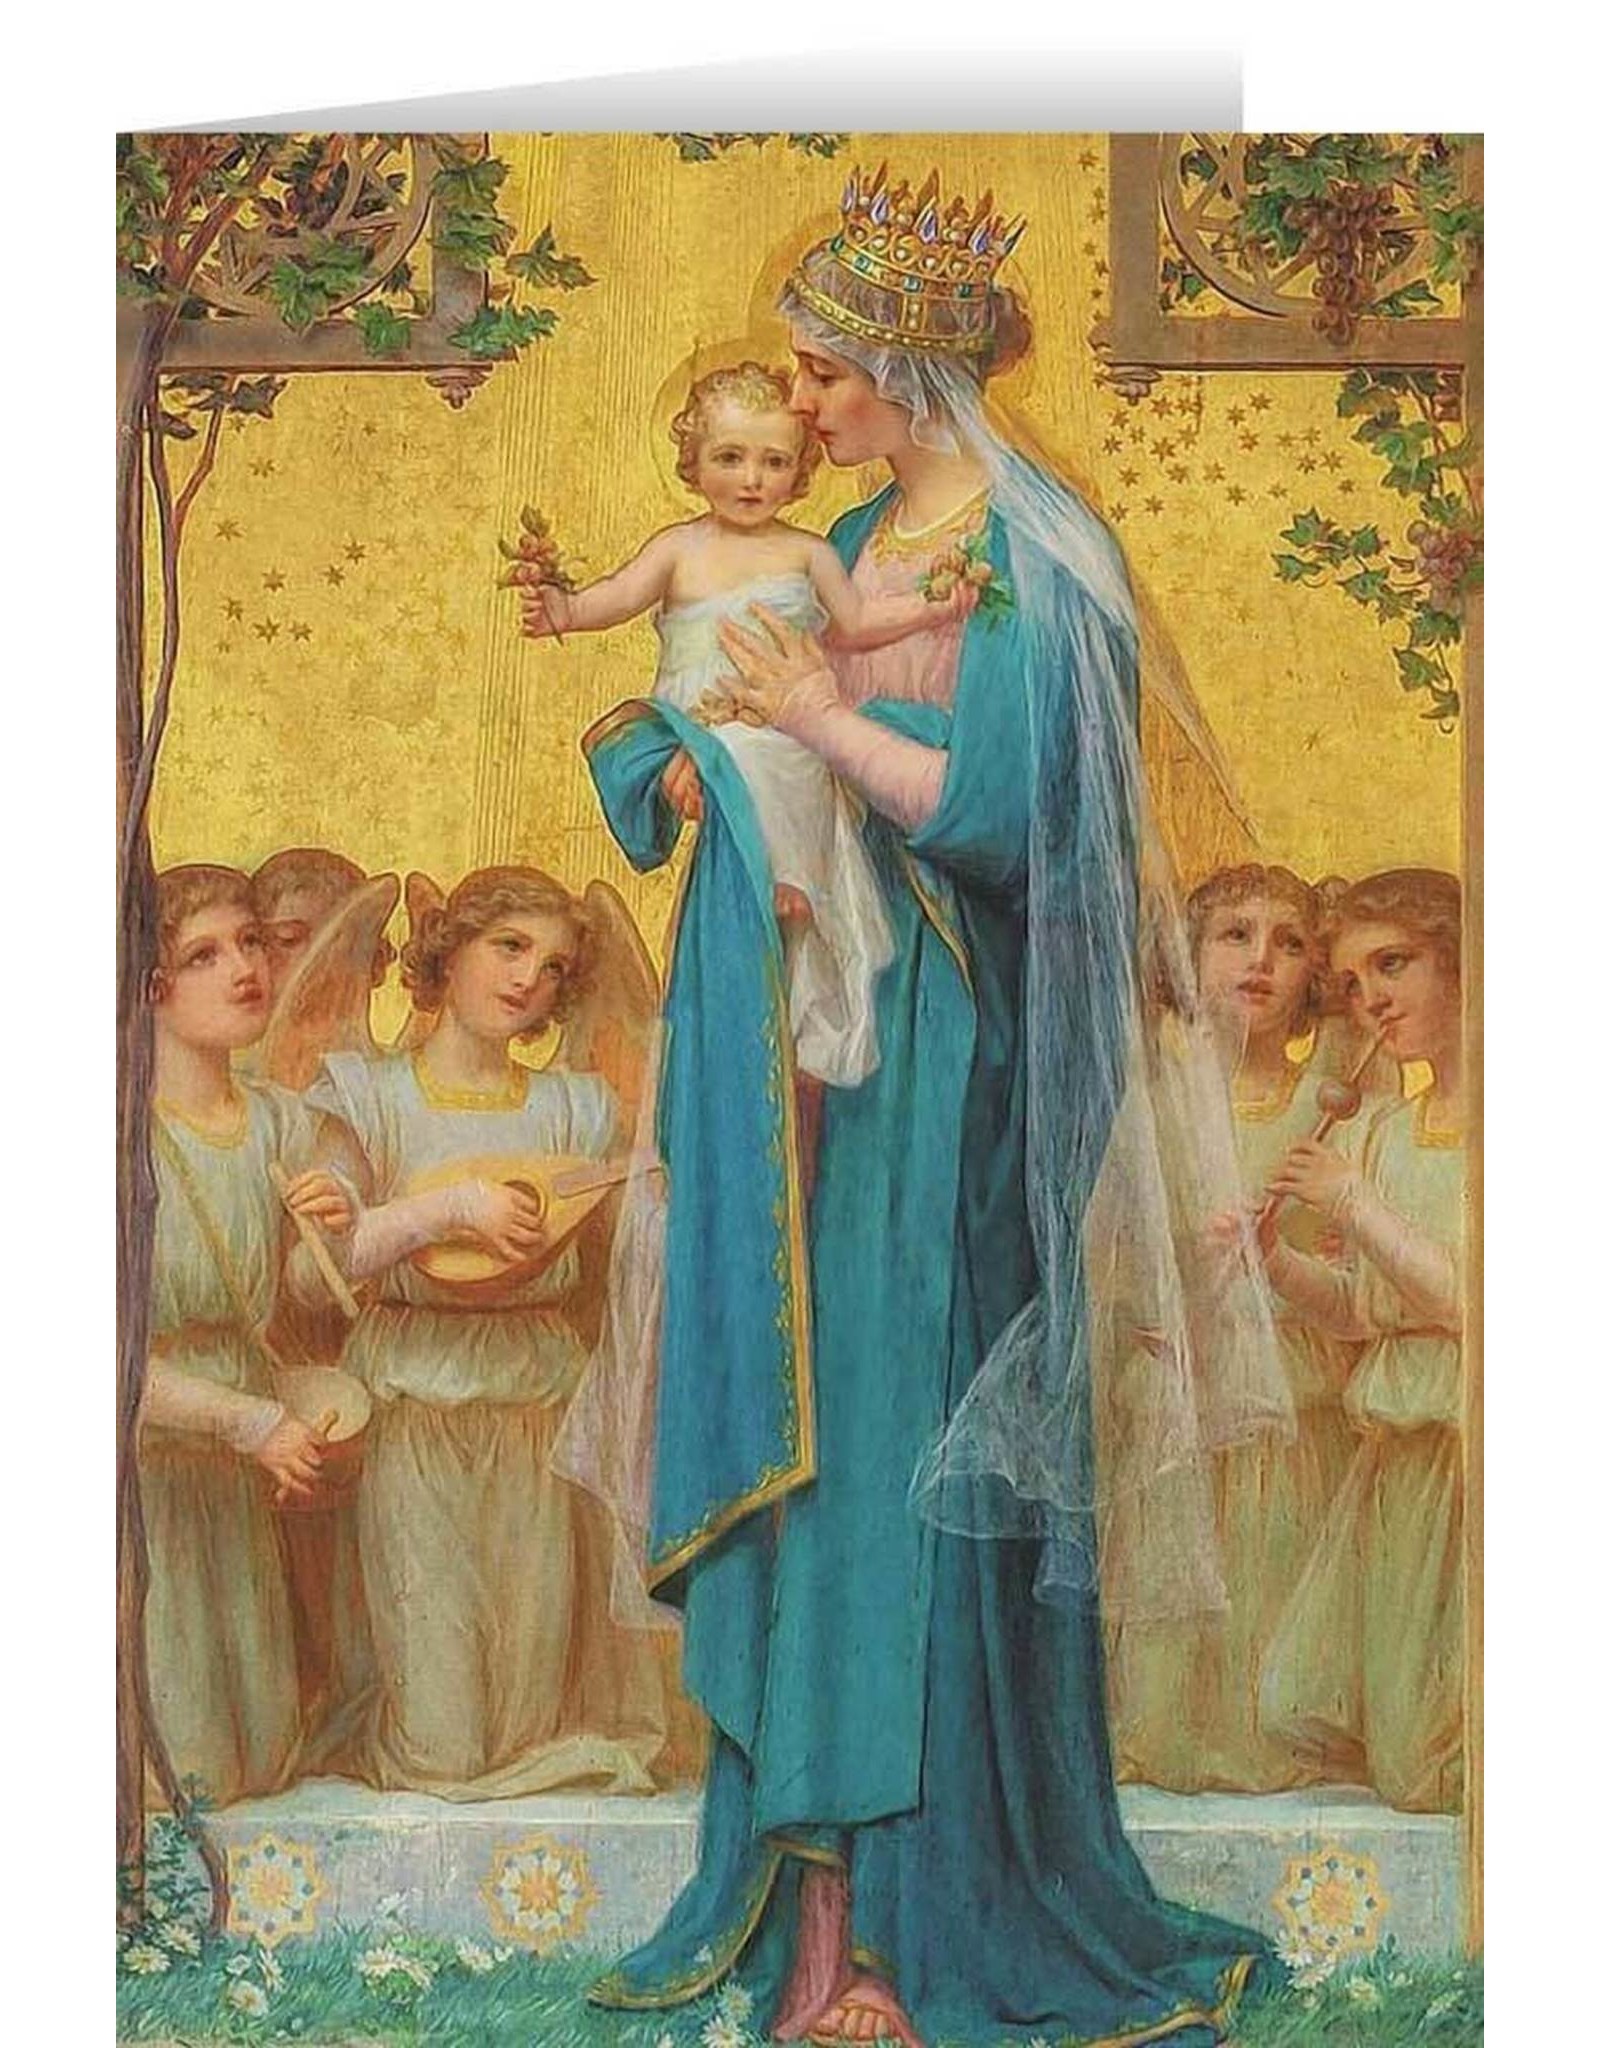 Boxed Set of 25 Christmas Cards - Madonna & Child by Enric M. Vidal